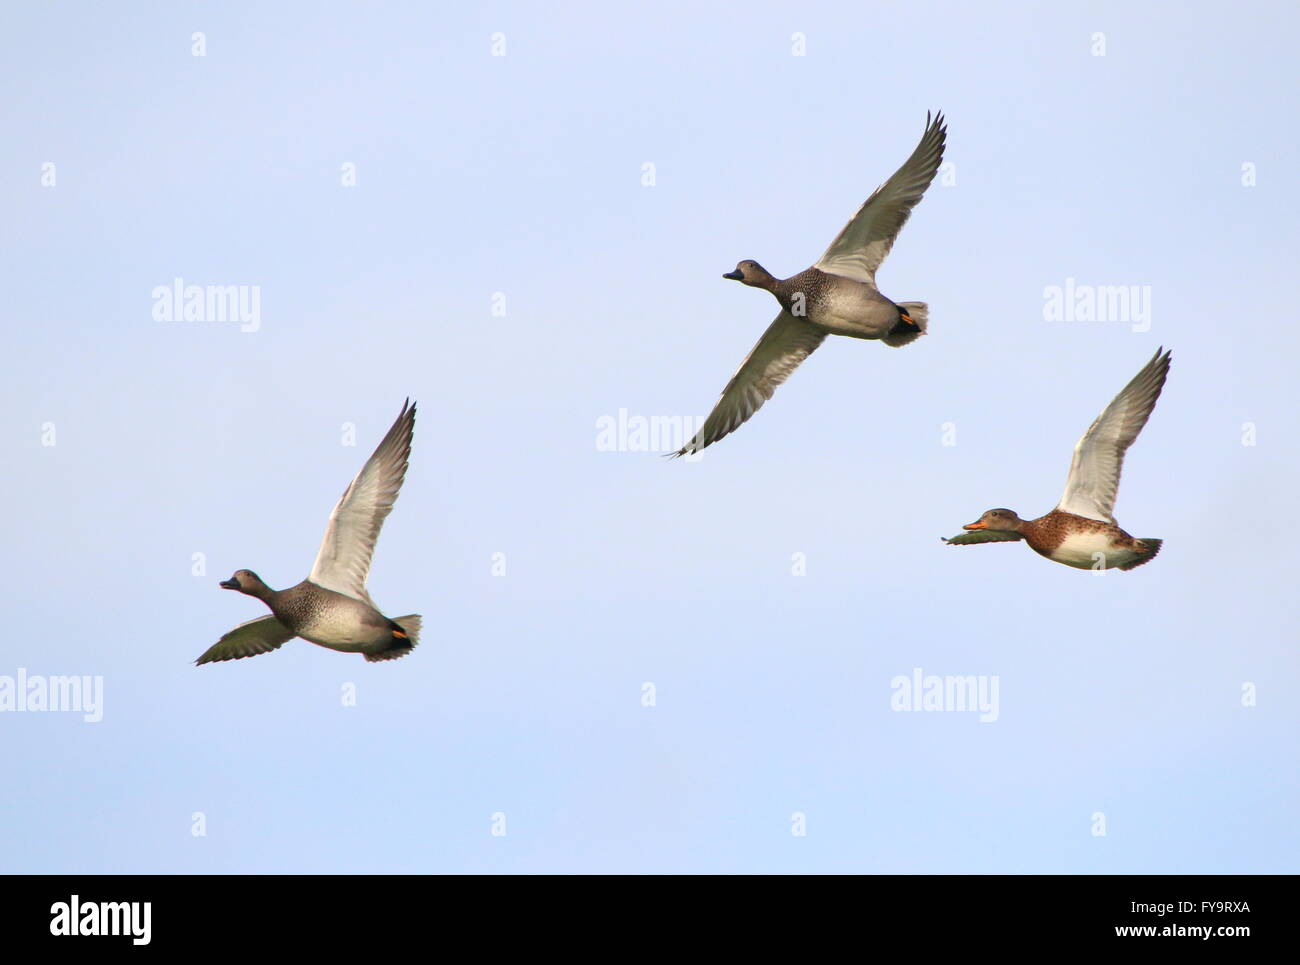 Three European Gadwall ducks (Anas strepera) in flight, a female and two males Stock Photo